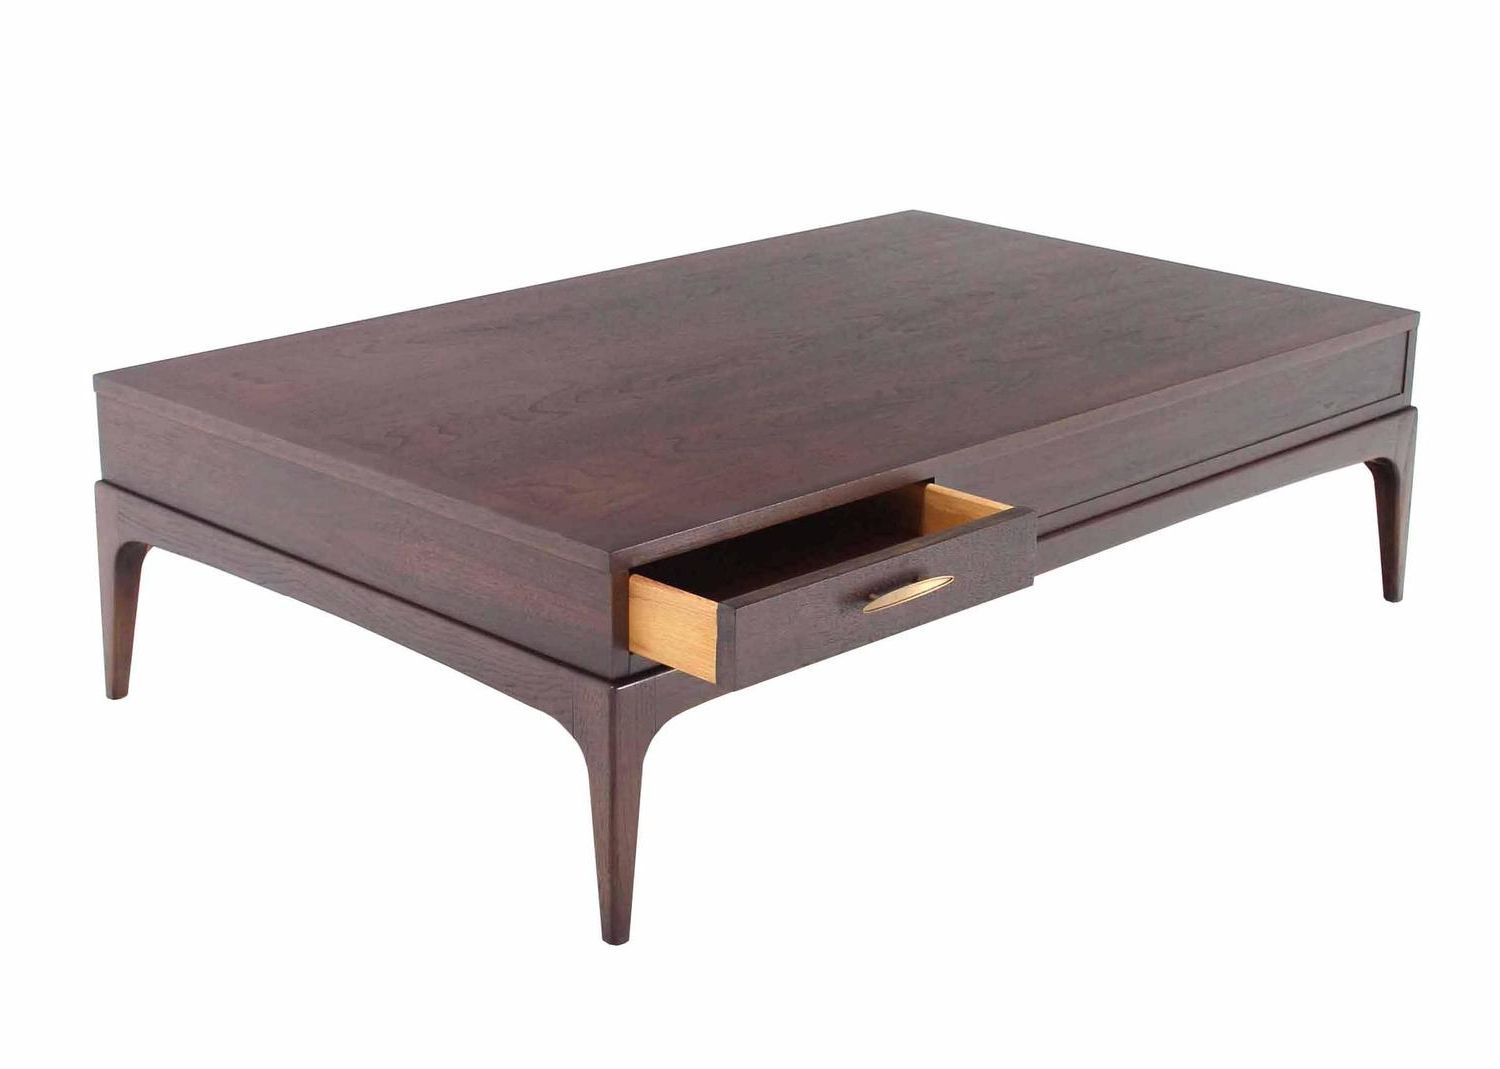 Fashionable Large Rectangle One Drawer Walnut Coffee Table For Sale At Within Walnut And Gold Rectangular Coffee Tables (View 11 of 20)